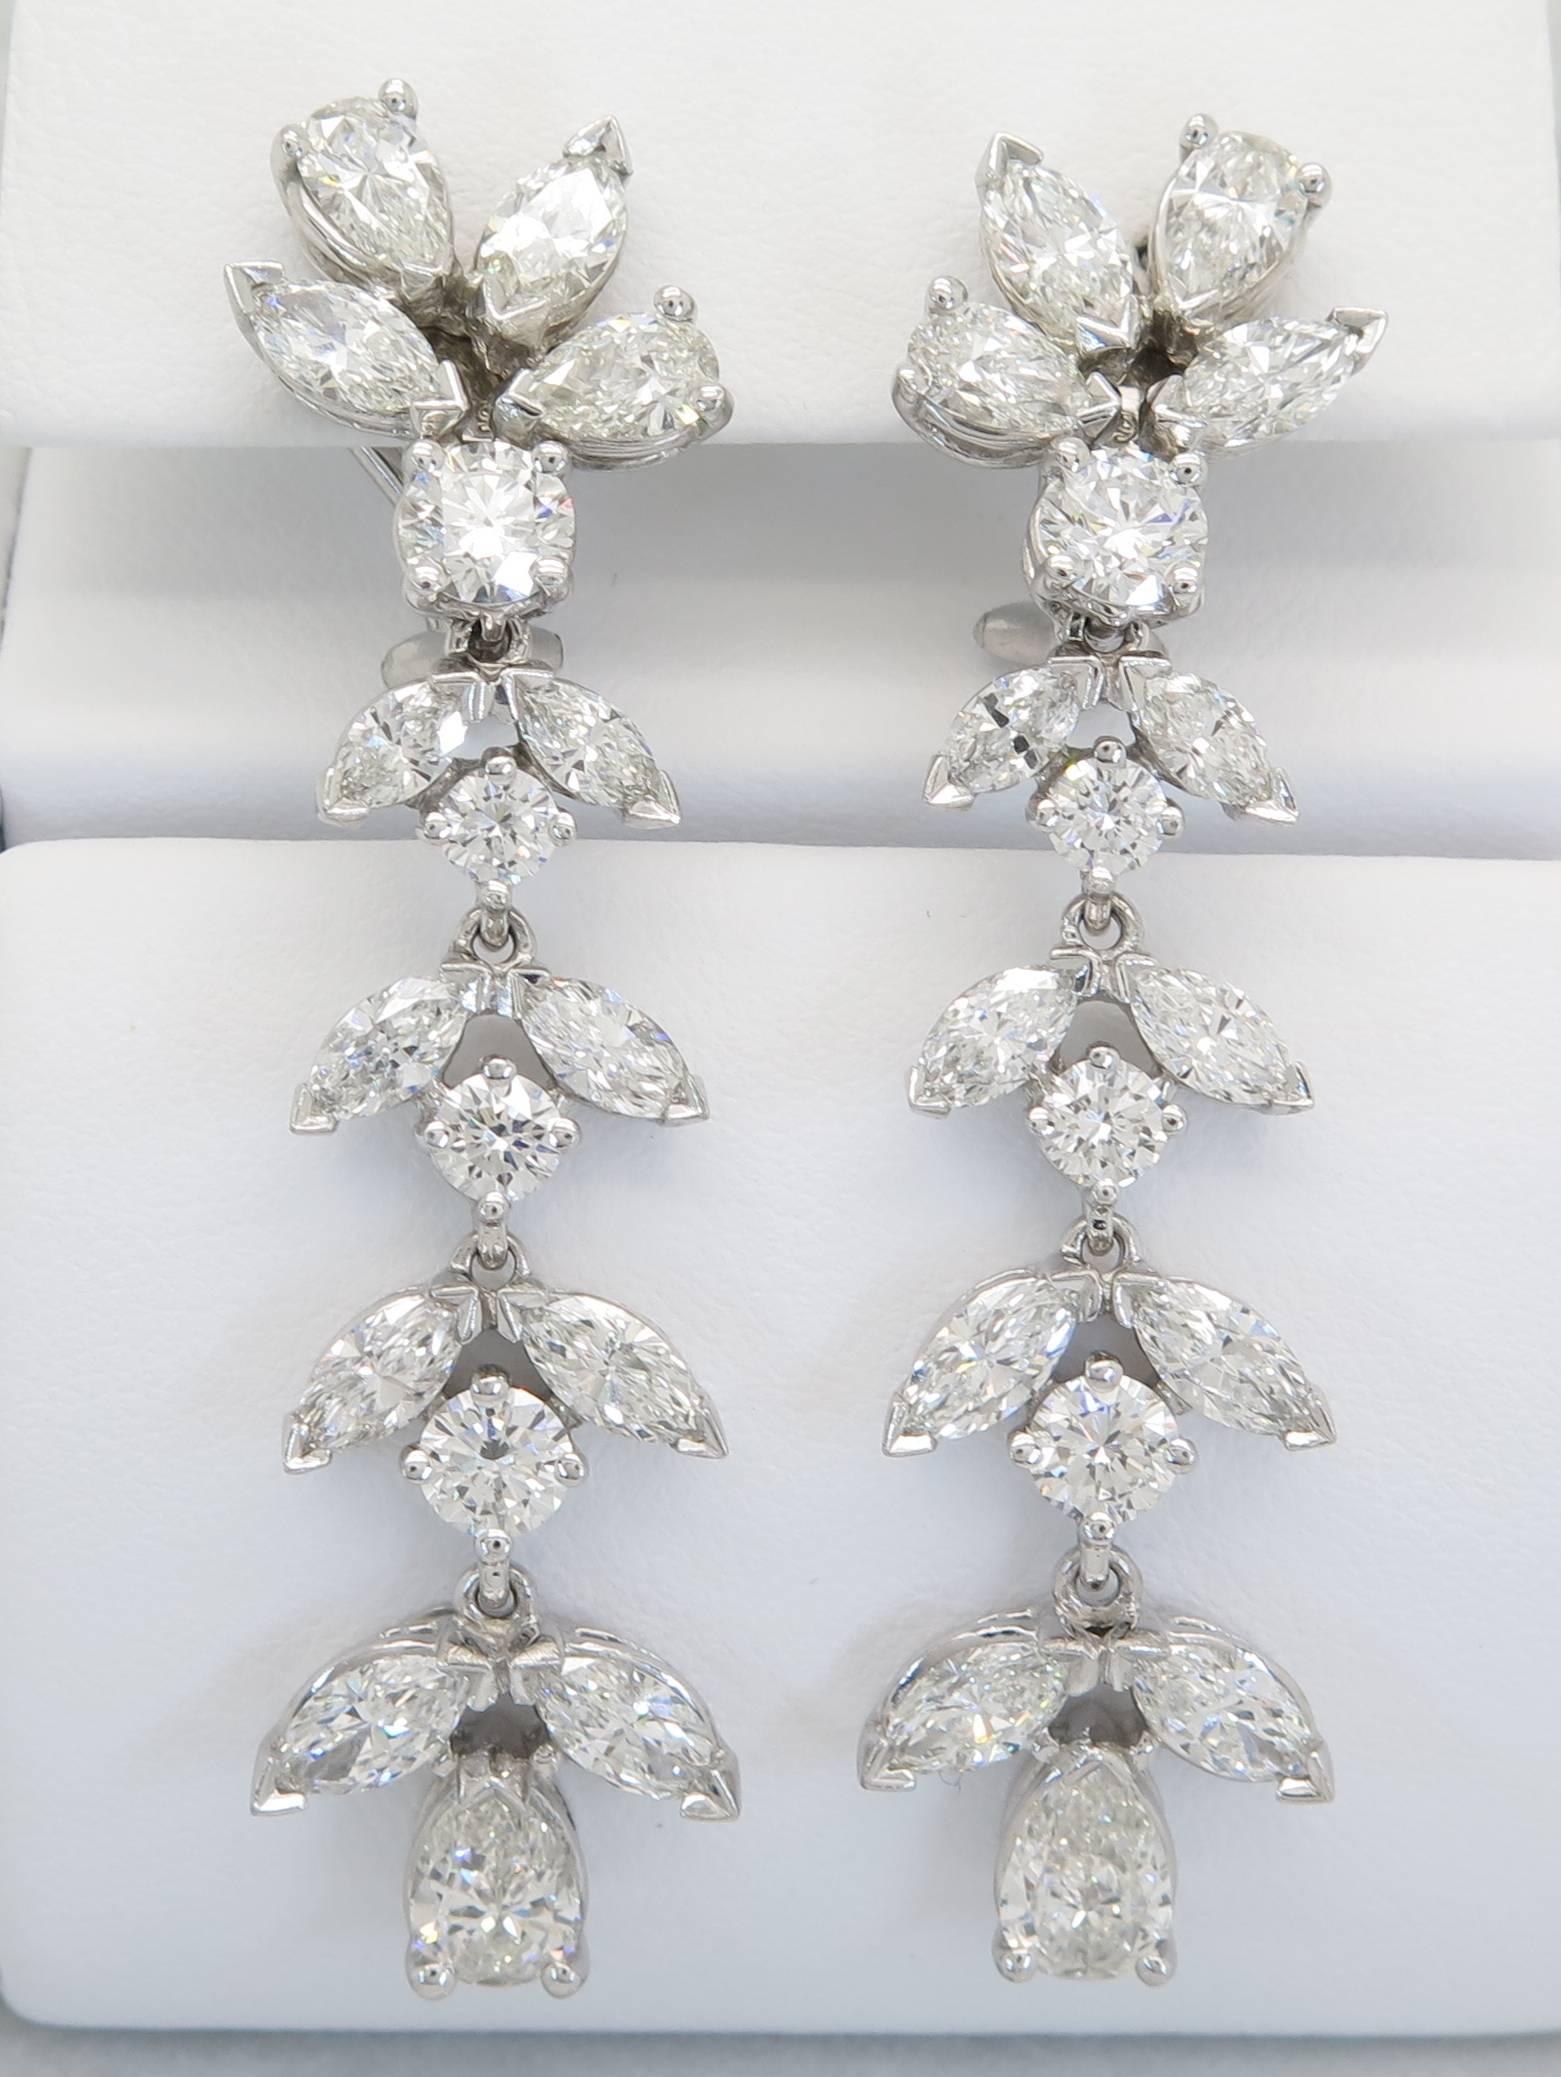 These showstopping earrings are absolutely breathtaking. They are from the prestigious designer Kwiat and feature a total carat weight of 8.75 carats. The earrings feature 6 pear brilliant cut, 20 marquise brilliant cut and 8 round brilliant cut